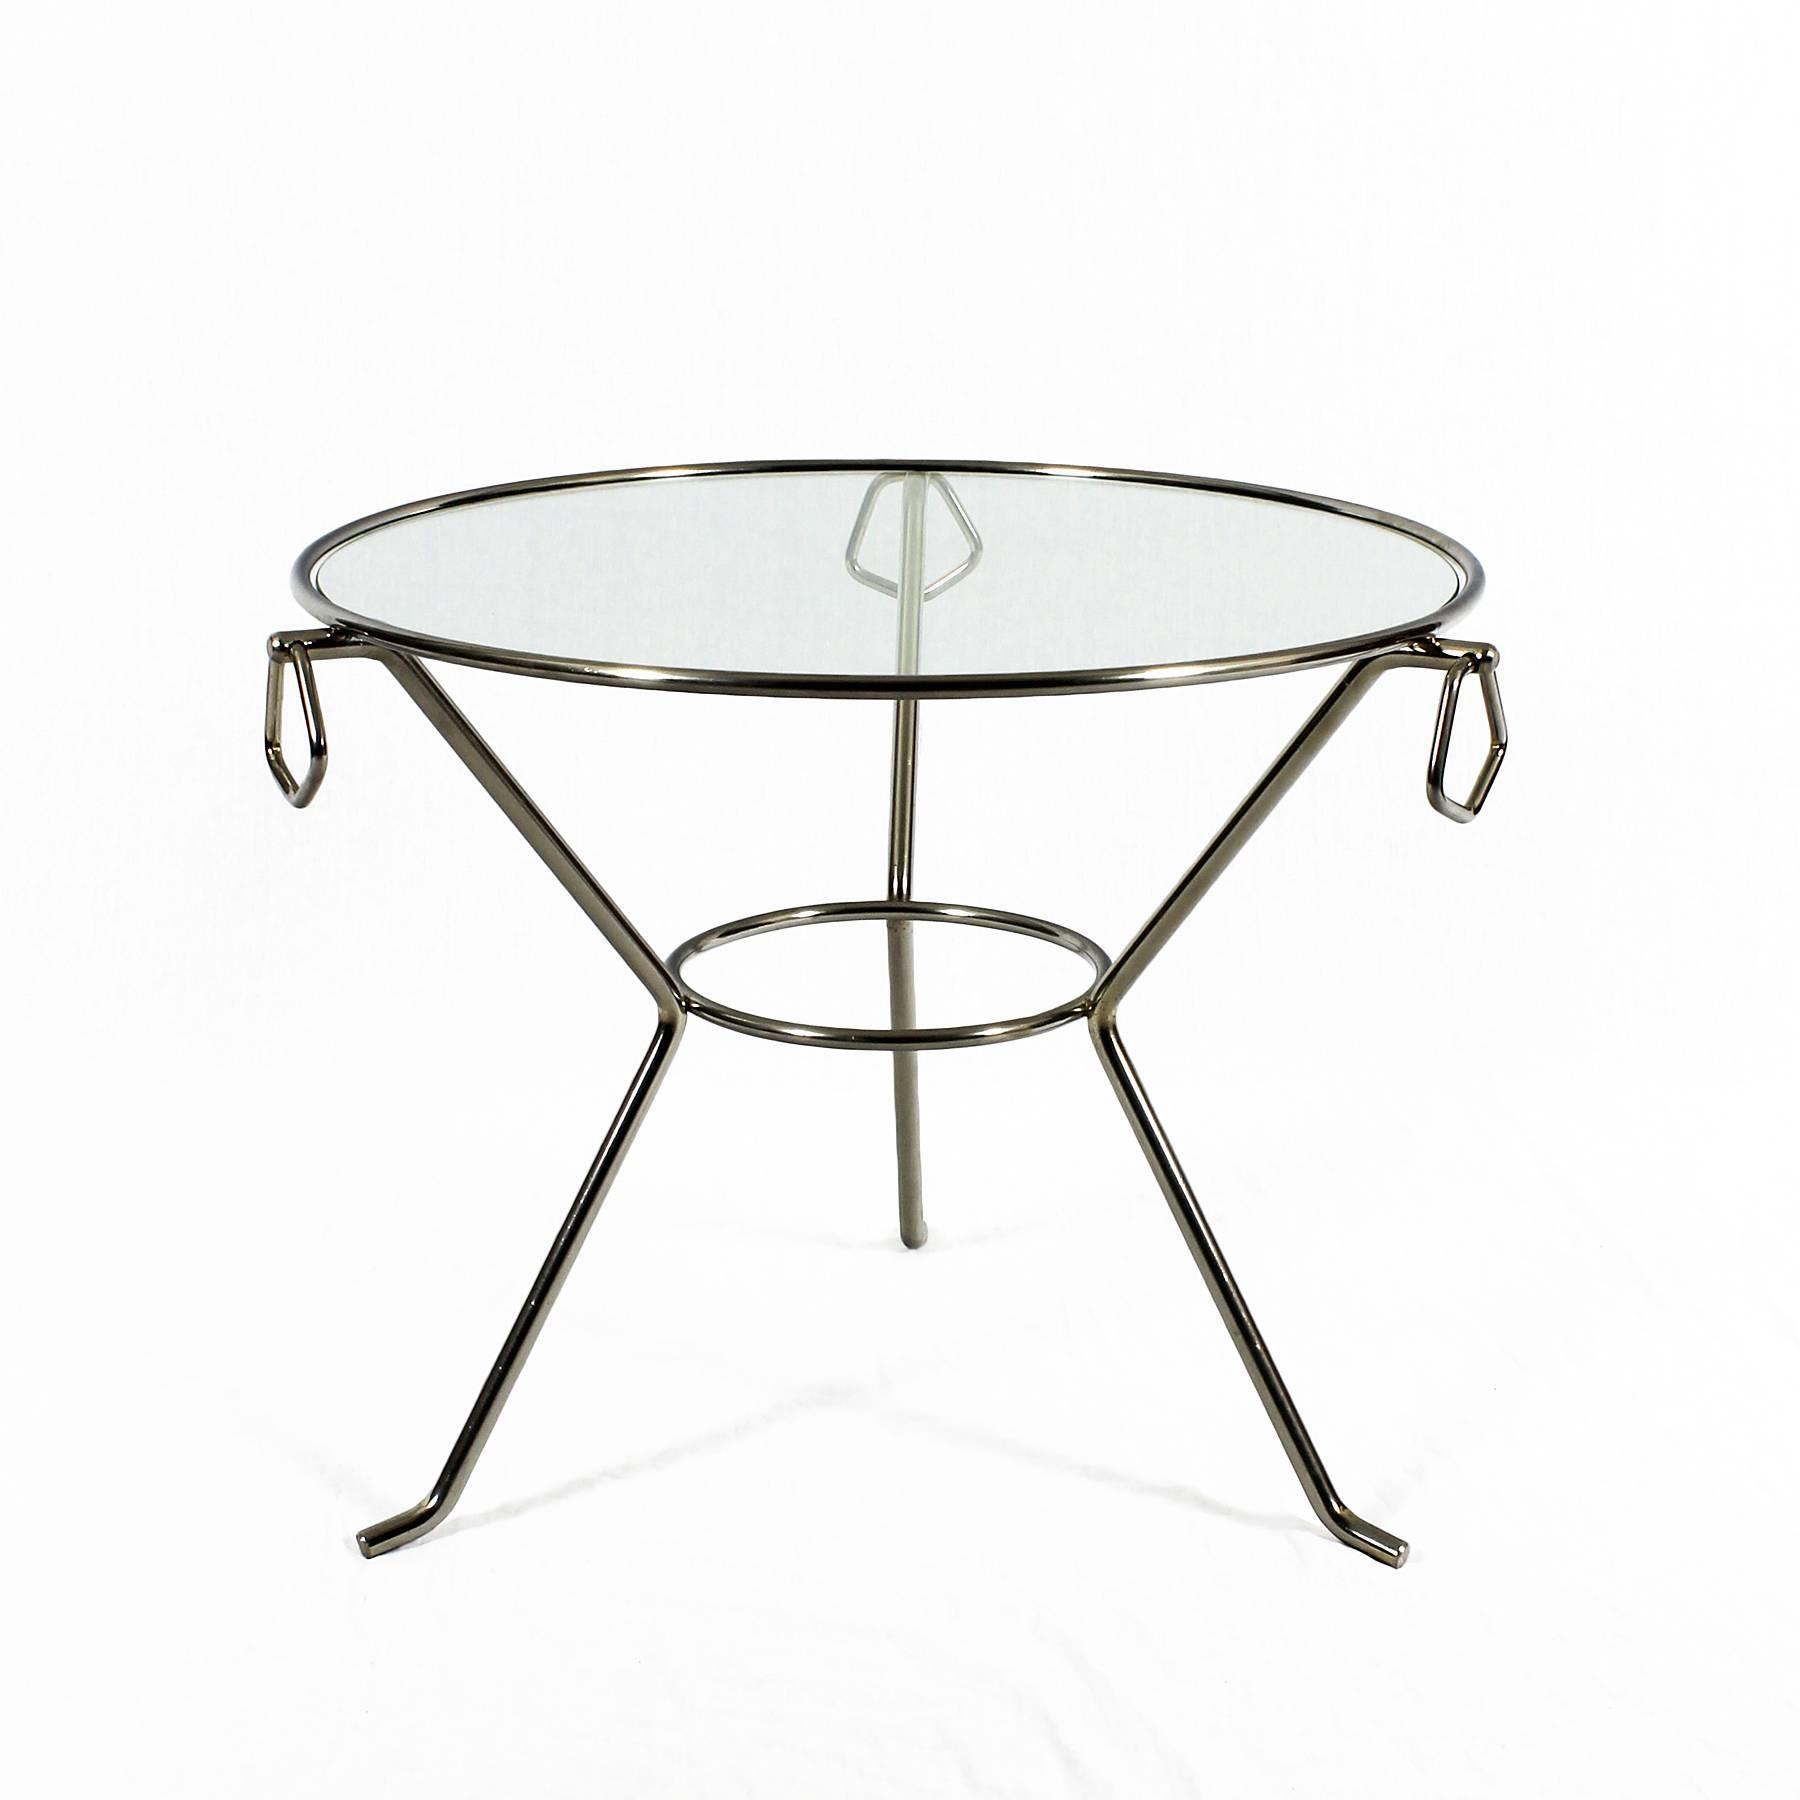 Nice small tripod table, nickel plated brass structure and glass, three decorative rings inserted at the top of stands.

France c. 1950 